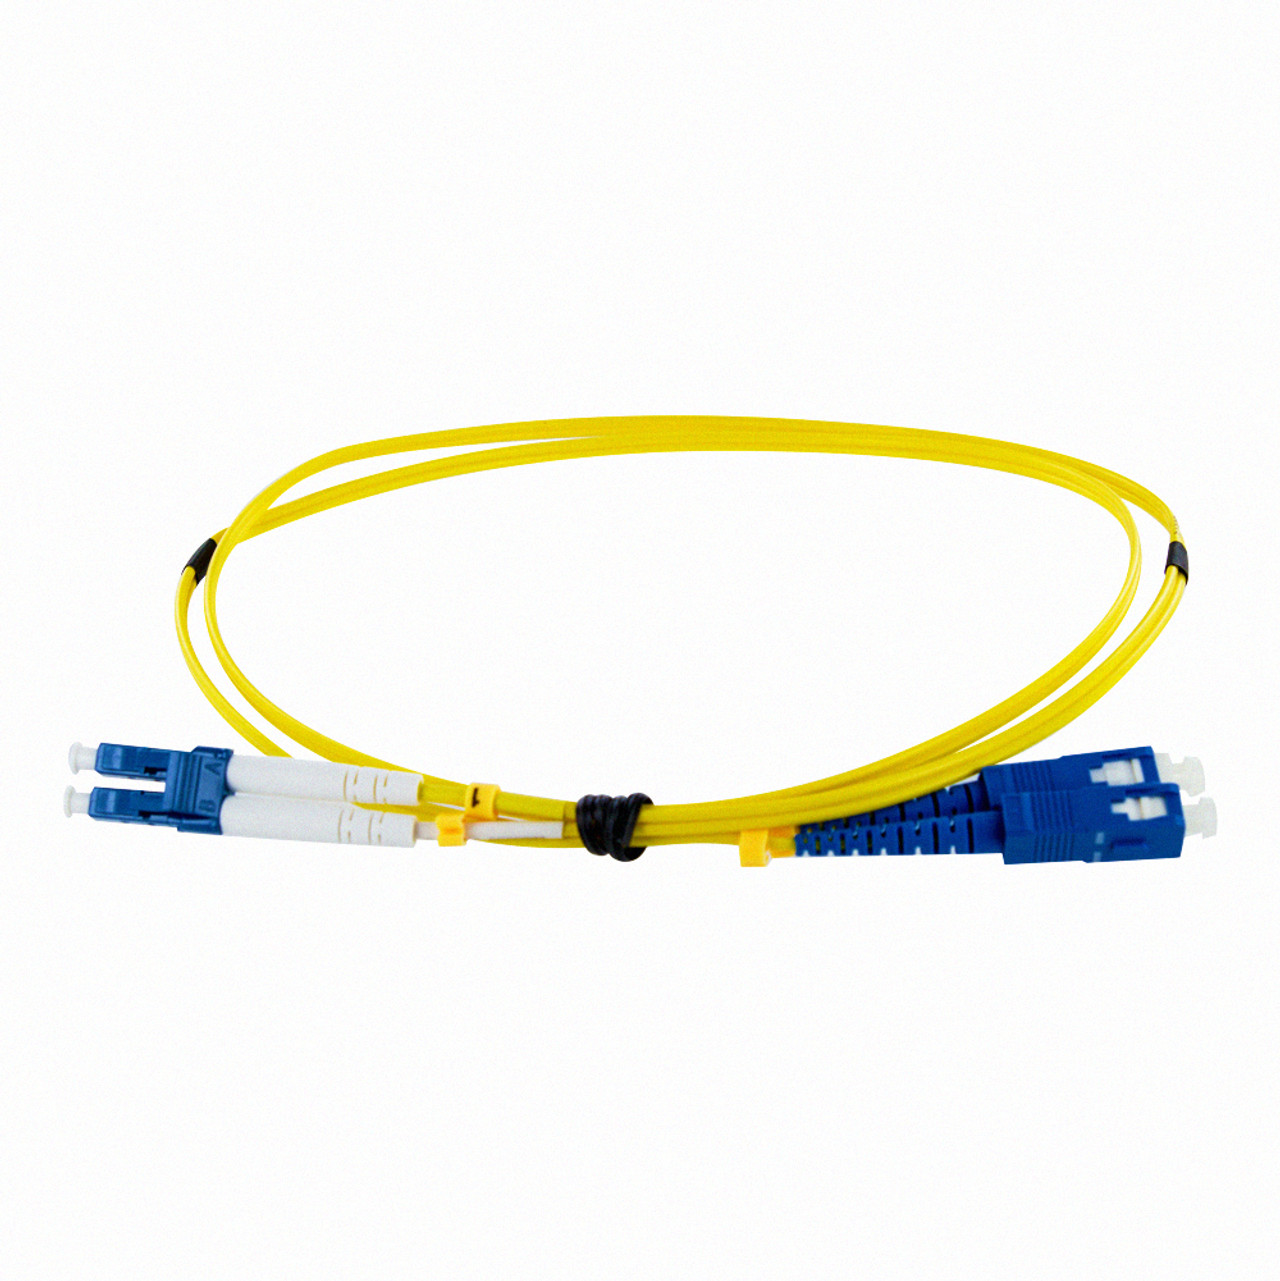 NavePoint LC-LC Fiber Optic Patch Cable Duplex 9/125 Singlemode 1M Yellow